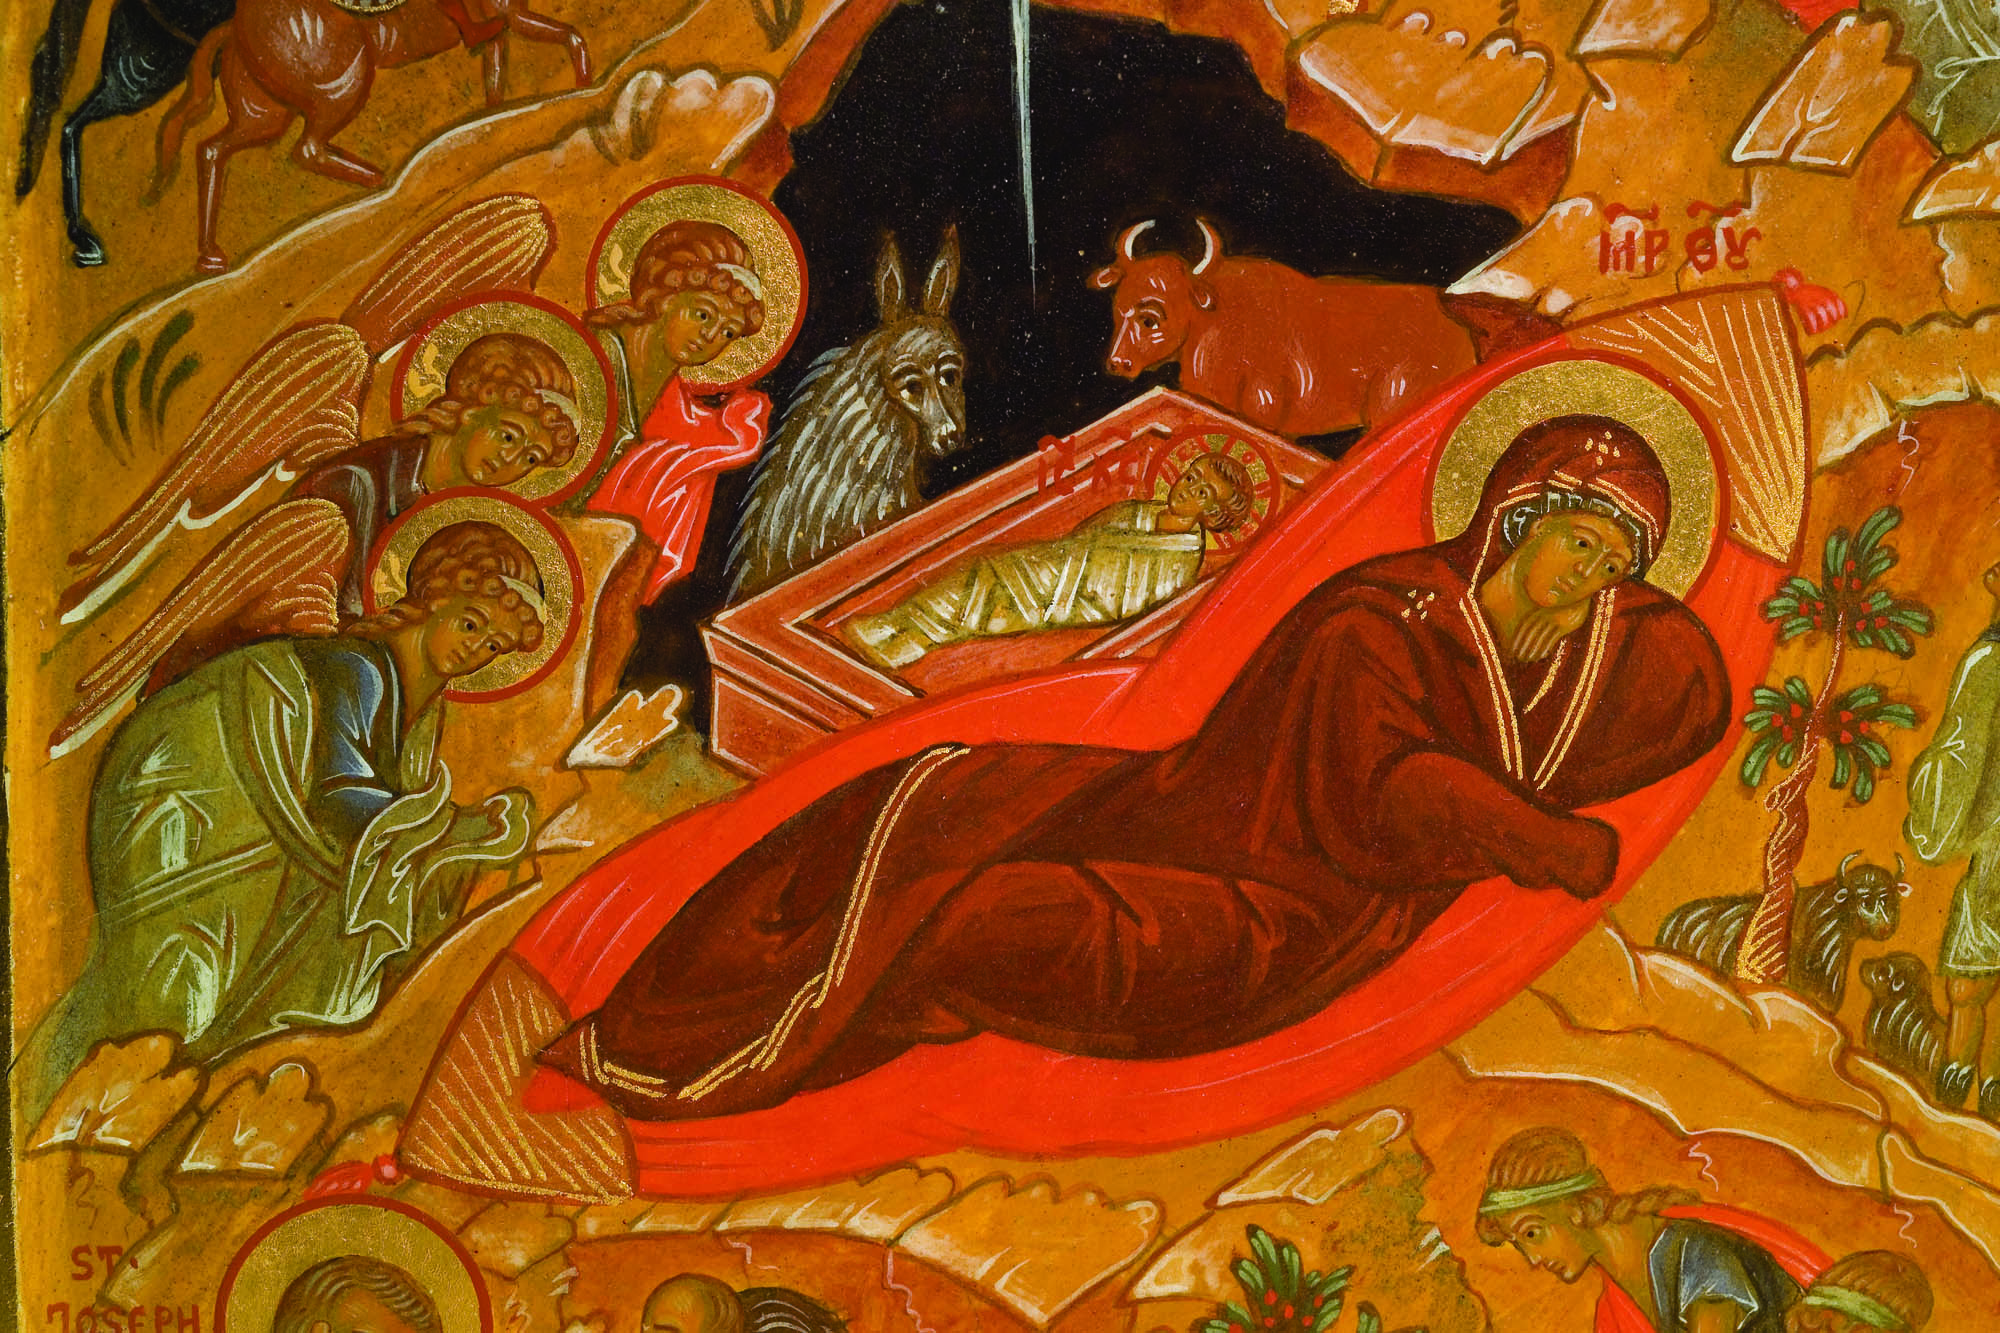 Detail from Triptych of the Holy Nativity of Christ, Russian Orthodox icon by Ksenia Pokrovsky. Photo: Jason Dowdle.